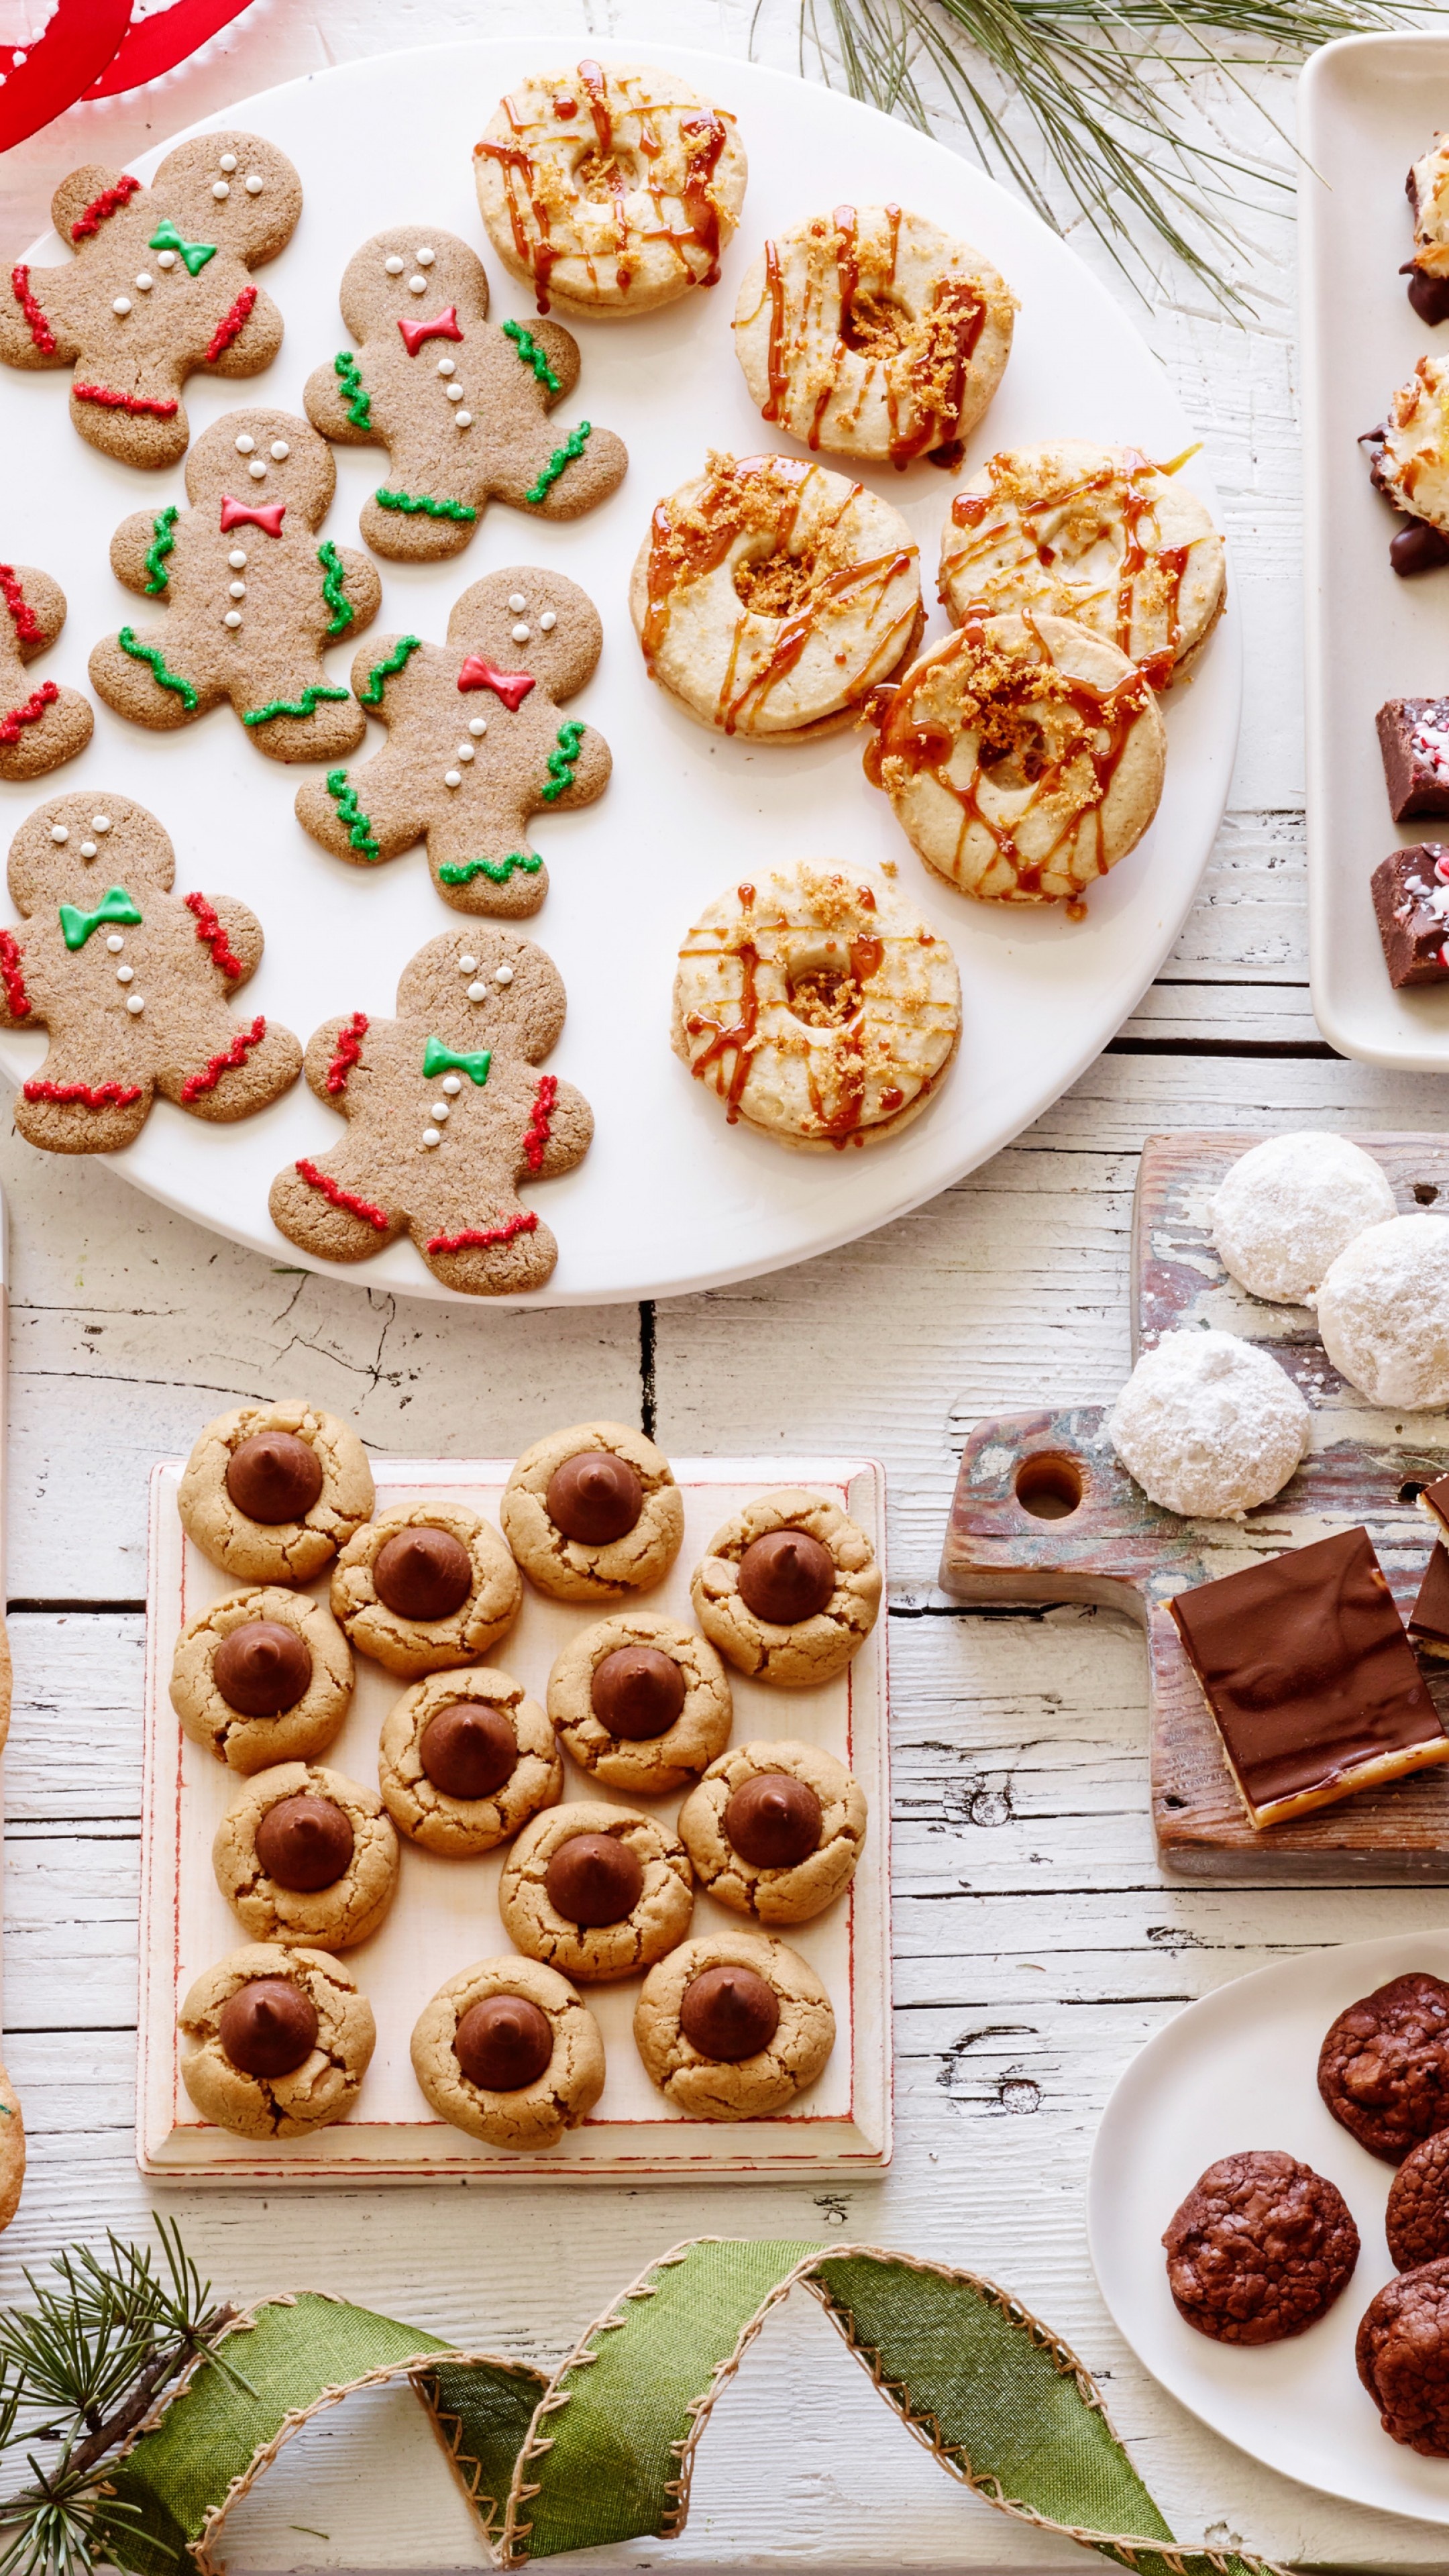 Gingerbread Man, Festive cookie plate, Holiday desserts, Sweet and savory, 2160x3840 4K Handy